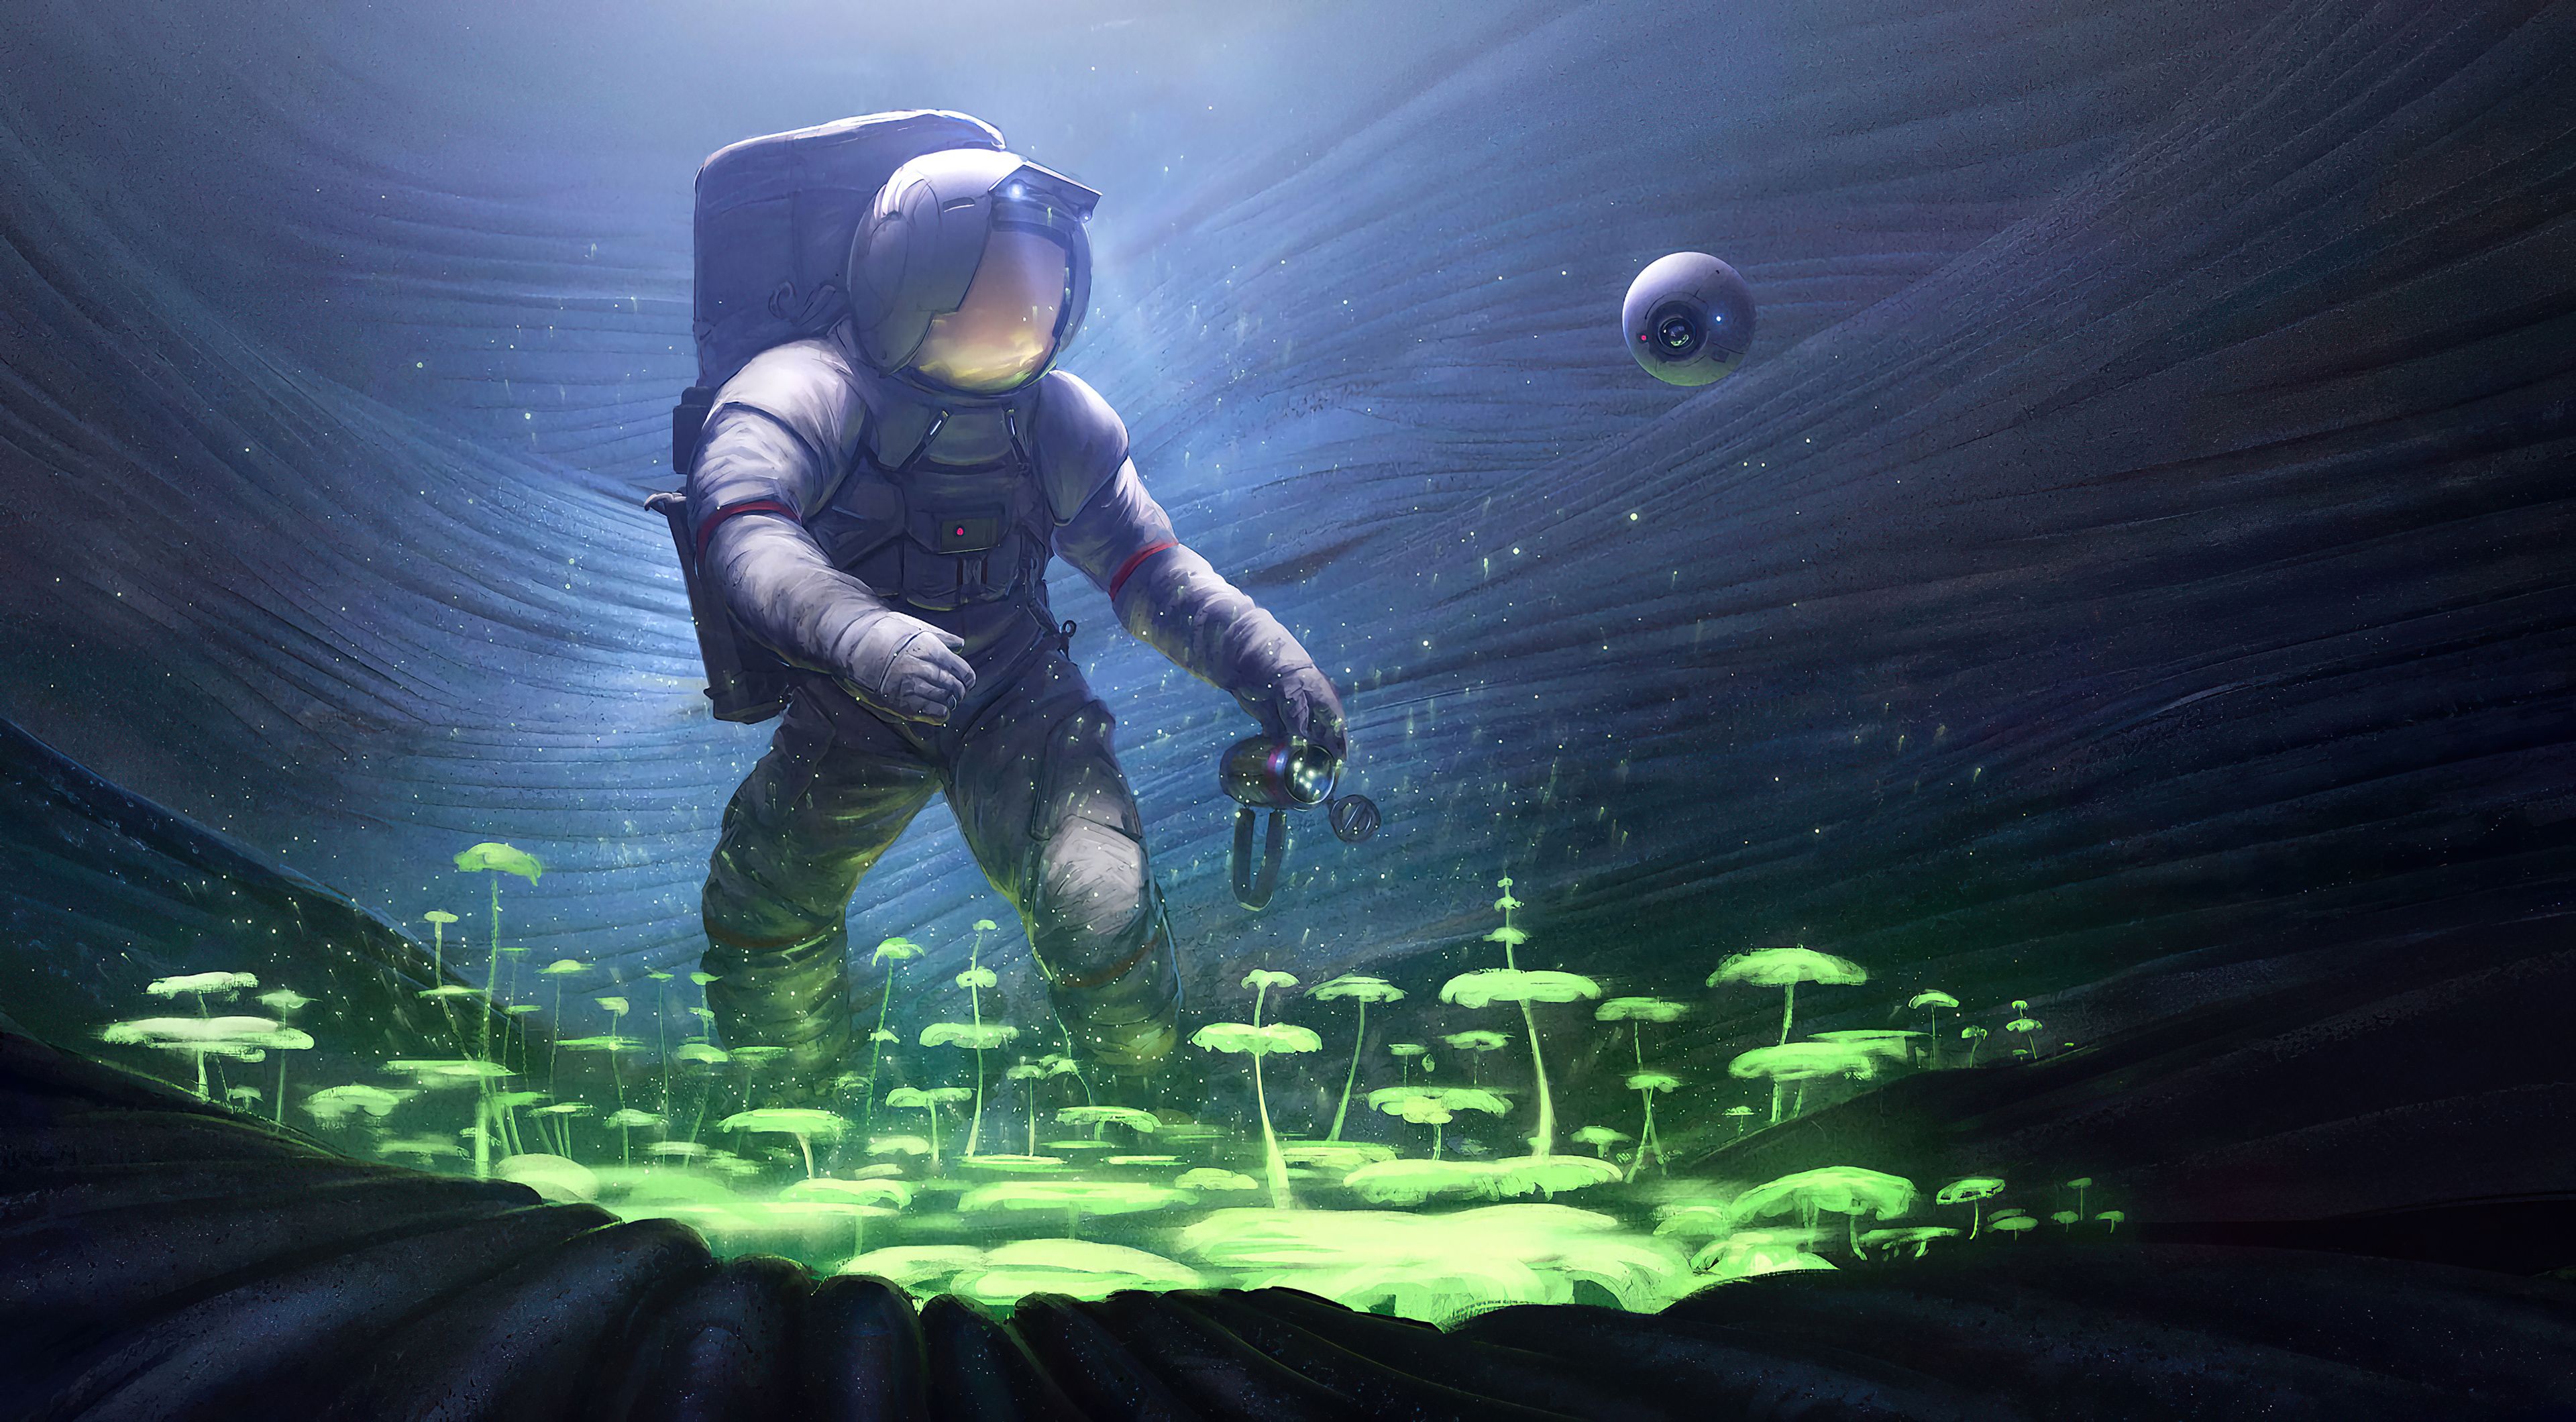 Scifi Astronaut Planting Trees Underwater, HD Artist, 4k Wallpaper, Image, Background, Photo and Picture